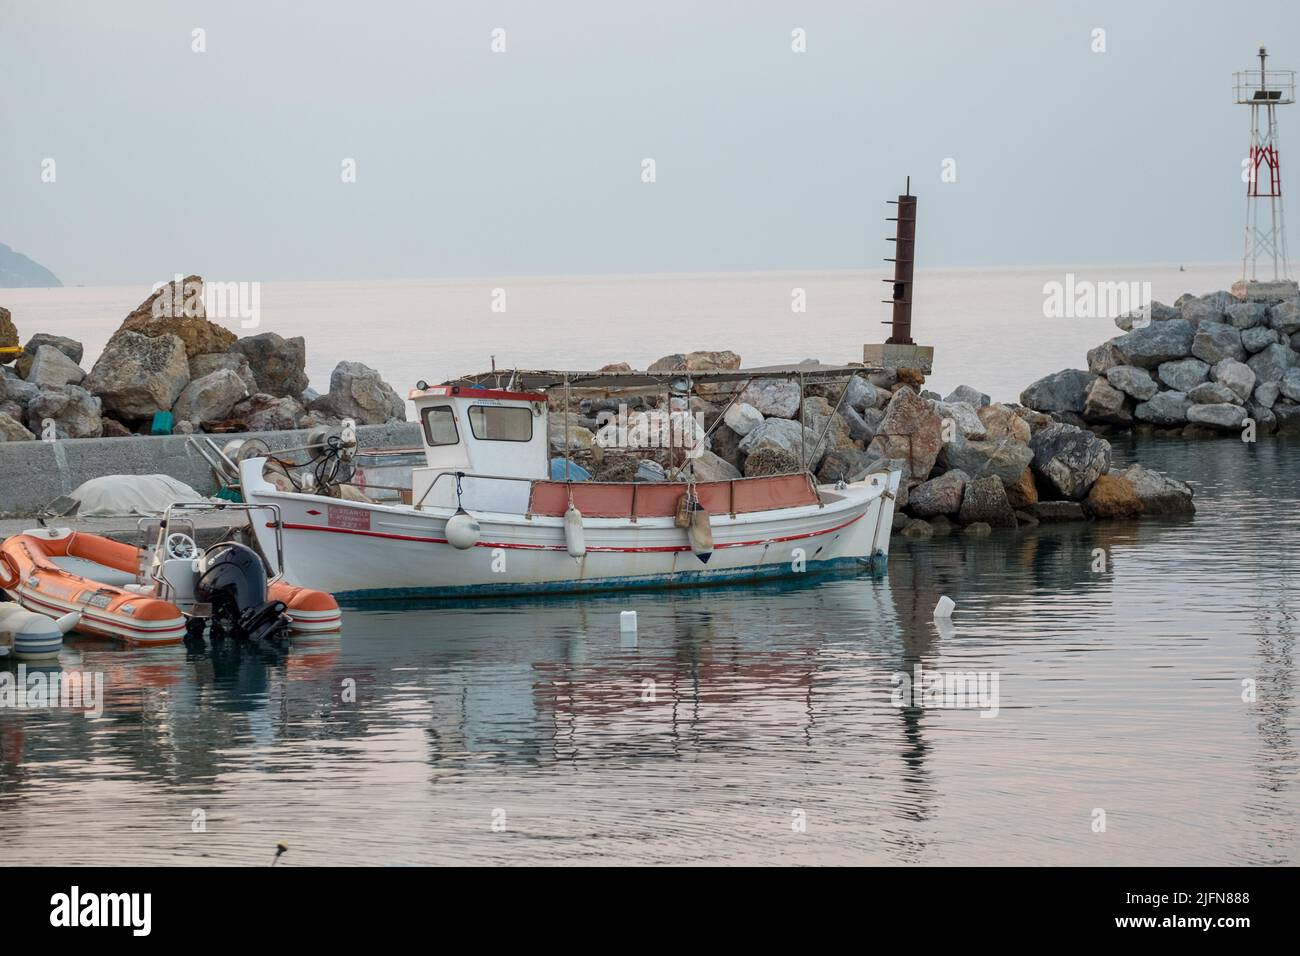 Seascape scenery of fishing boats in a harbor Stock Photo